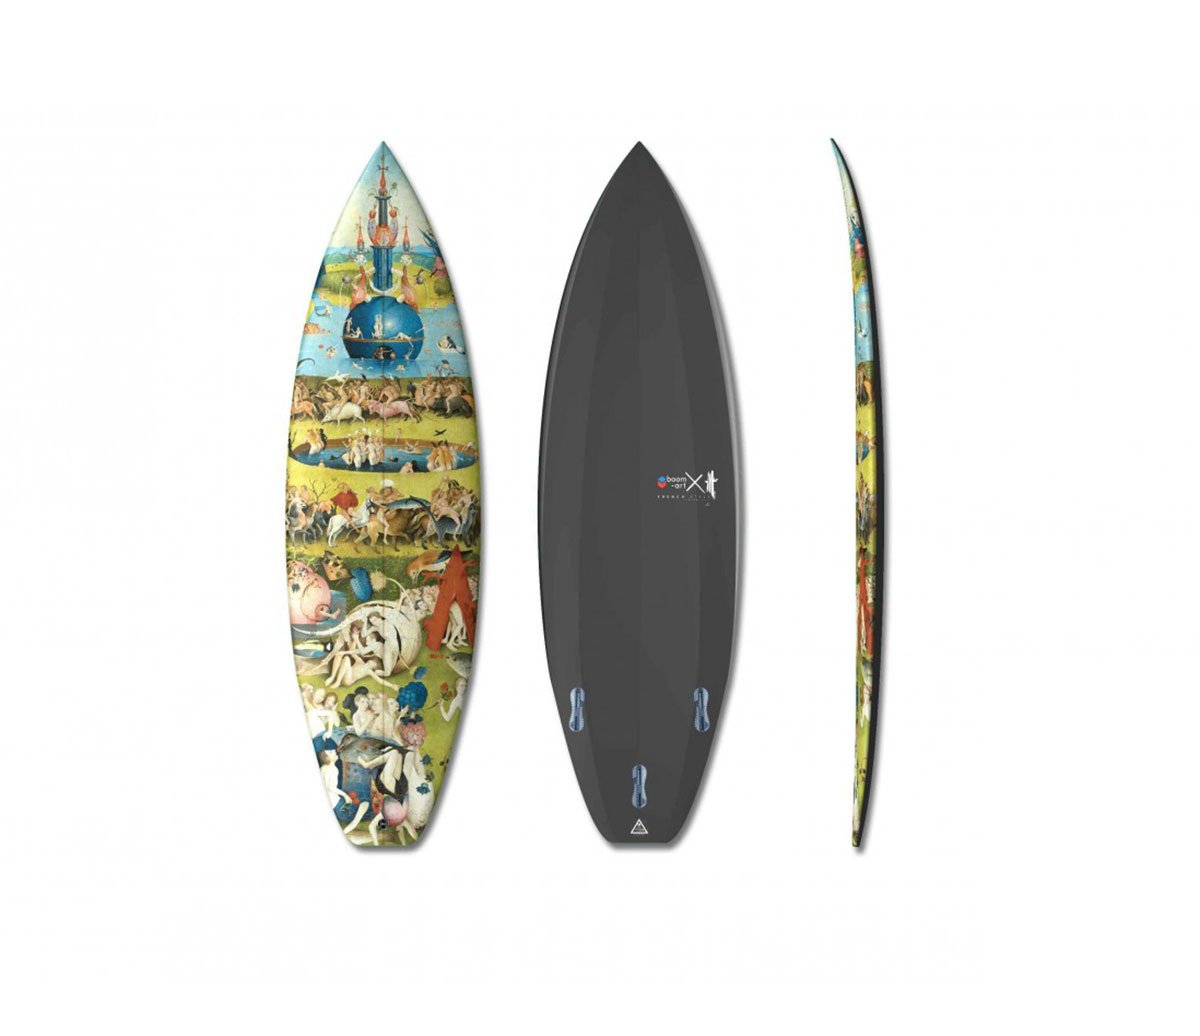 Triptych and Tapestry Surfboards by Boom Art